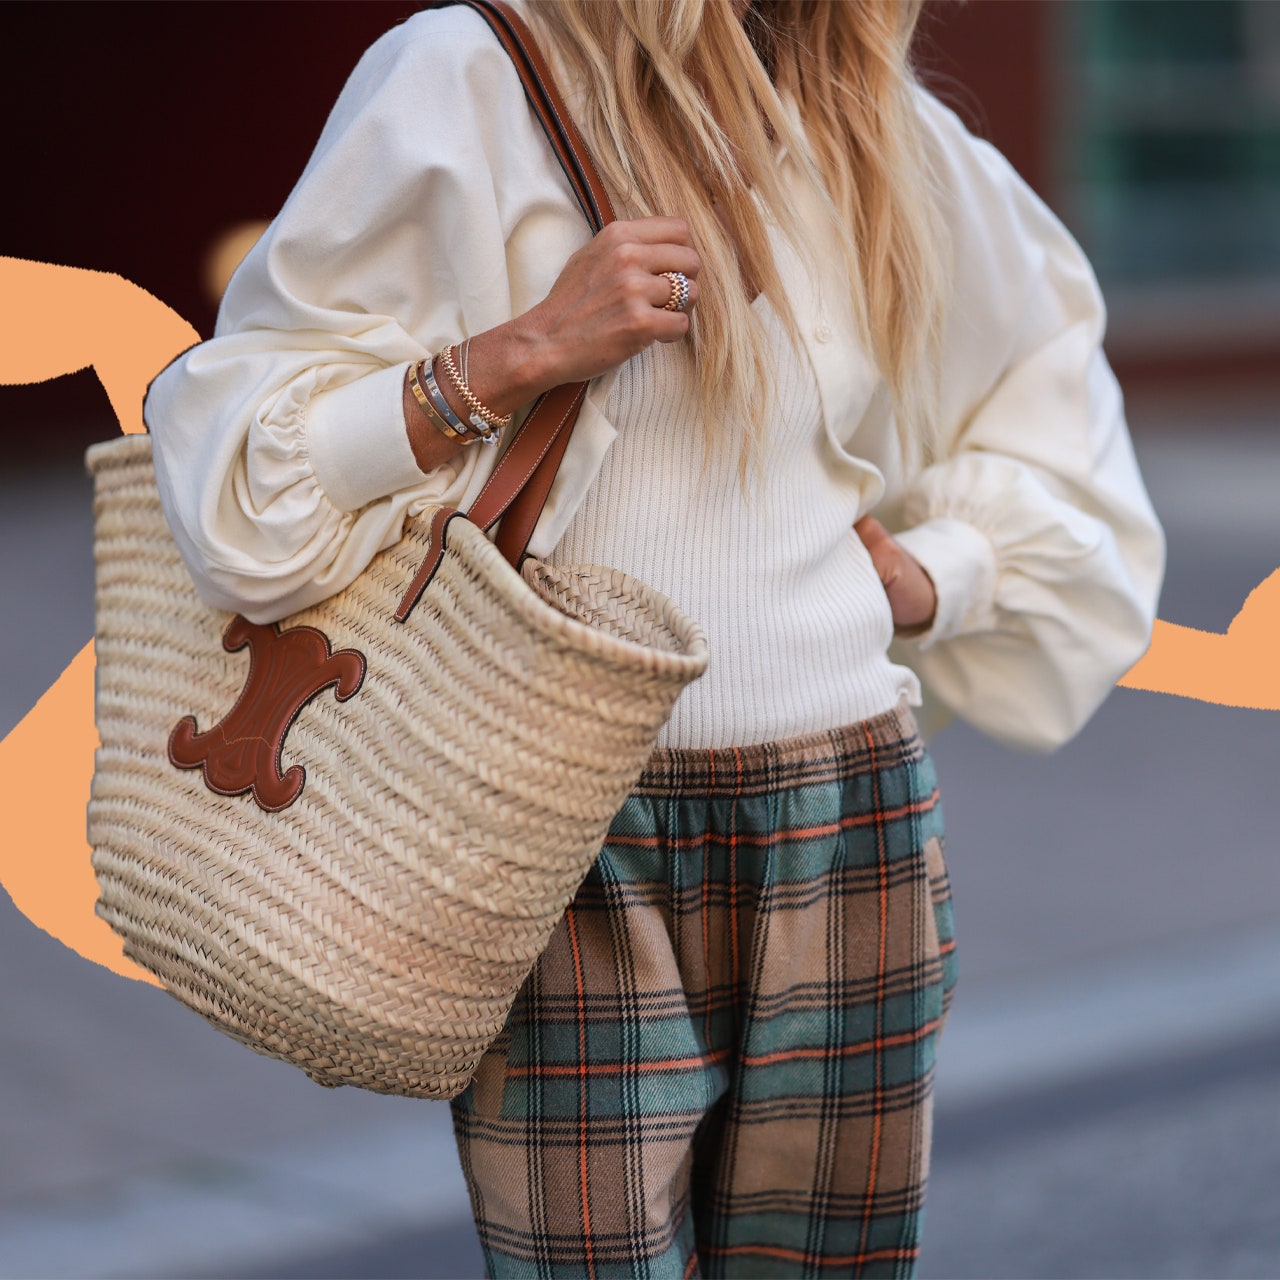 A beach bag is the one accessory that'll see you through the summer